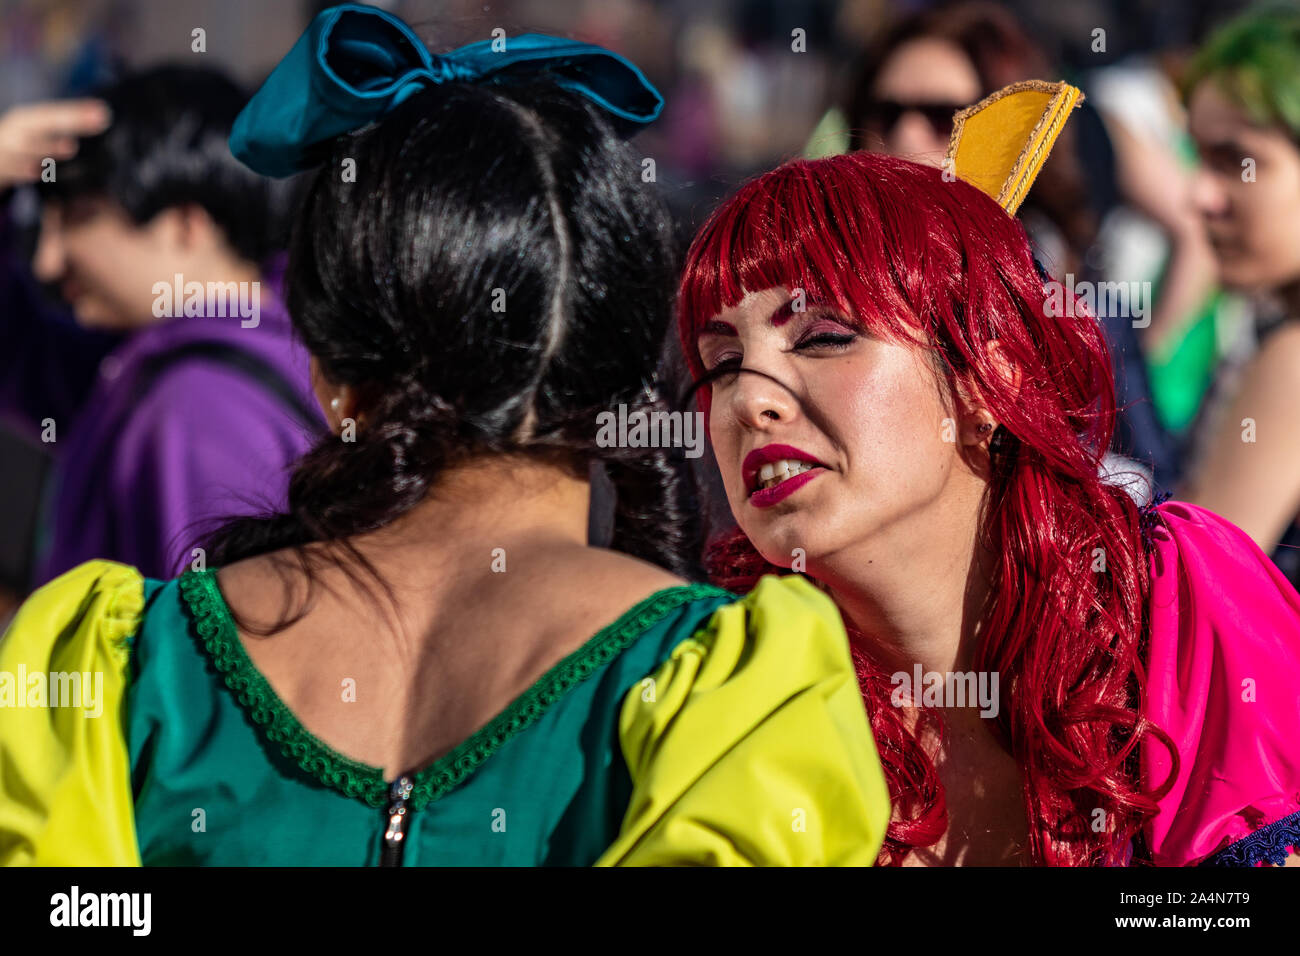 Rome, Italy, 5 April 2019, Comic and Cosplayer event called "Romics". Close-ups and medium shots of Cinderella actress in daylight. The crowd in costume. Stock Photo